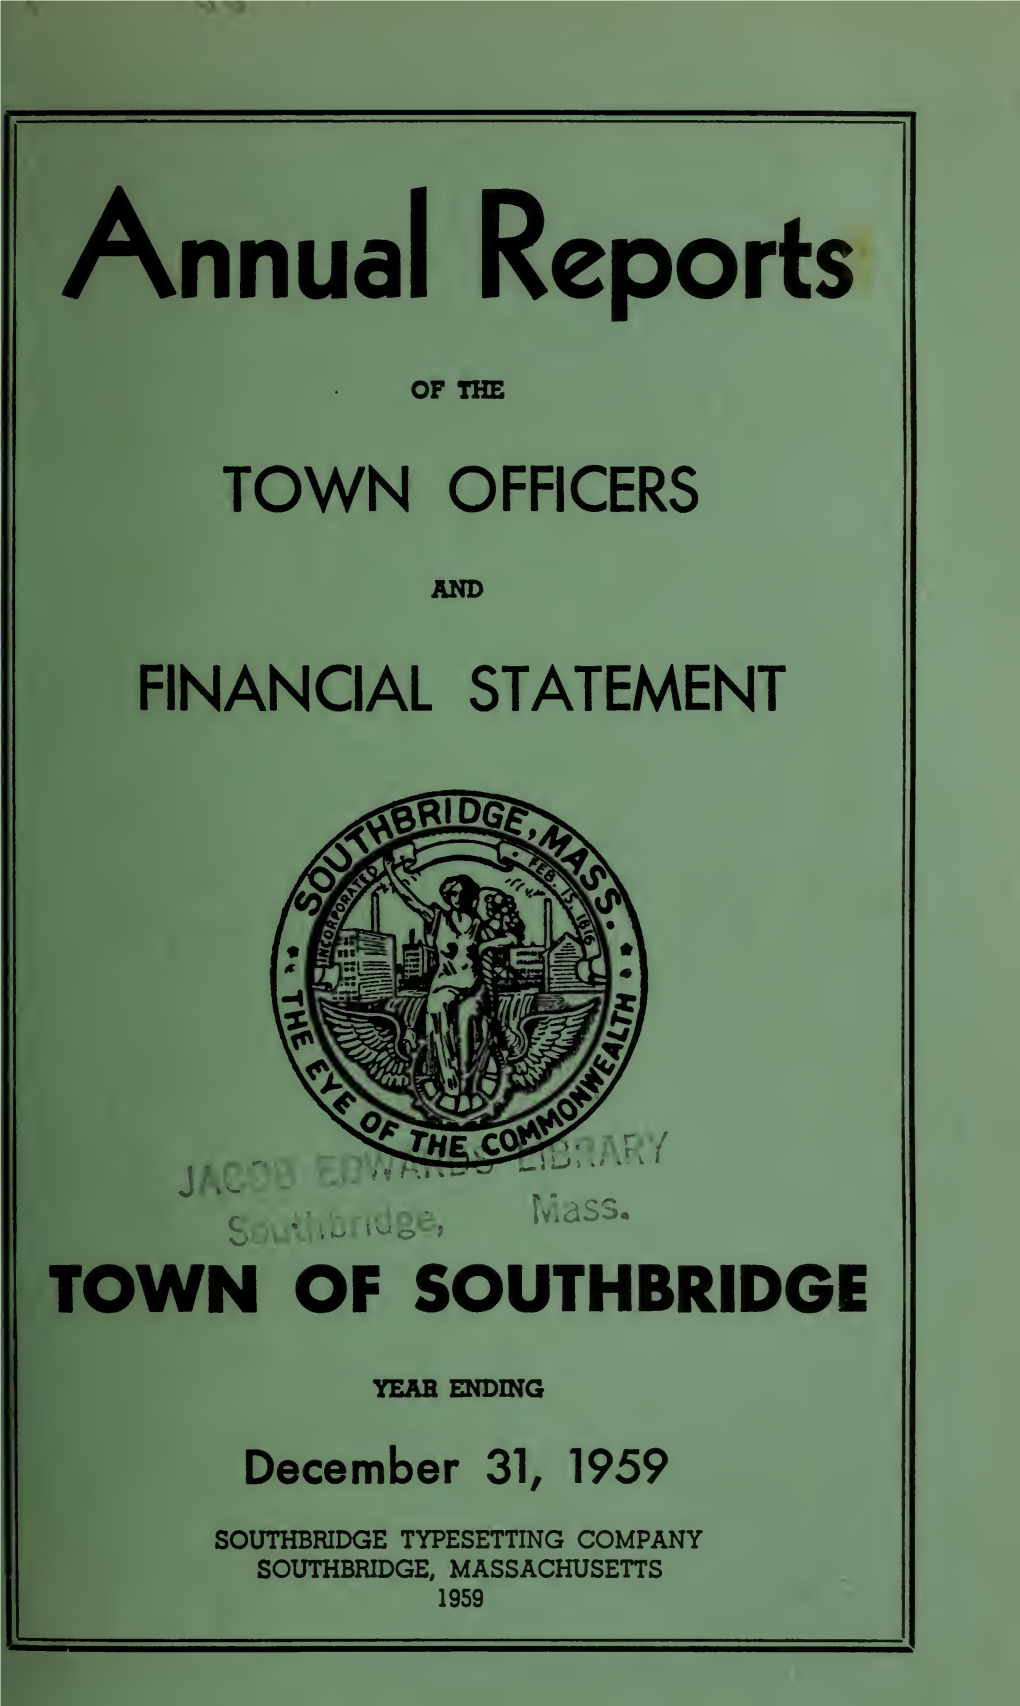 Annual Reports of the Town Officers of Southbridge for the Year Ending